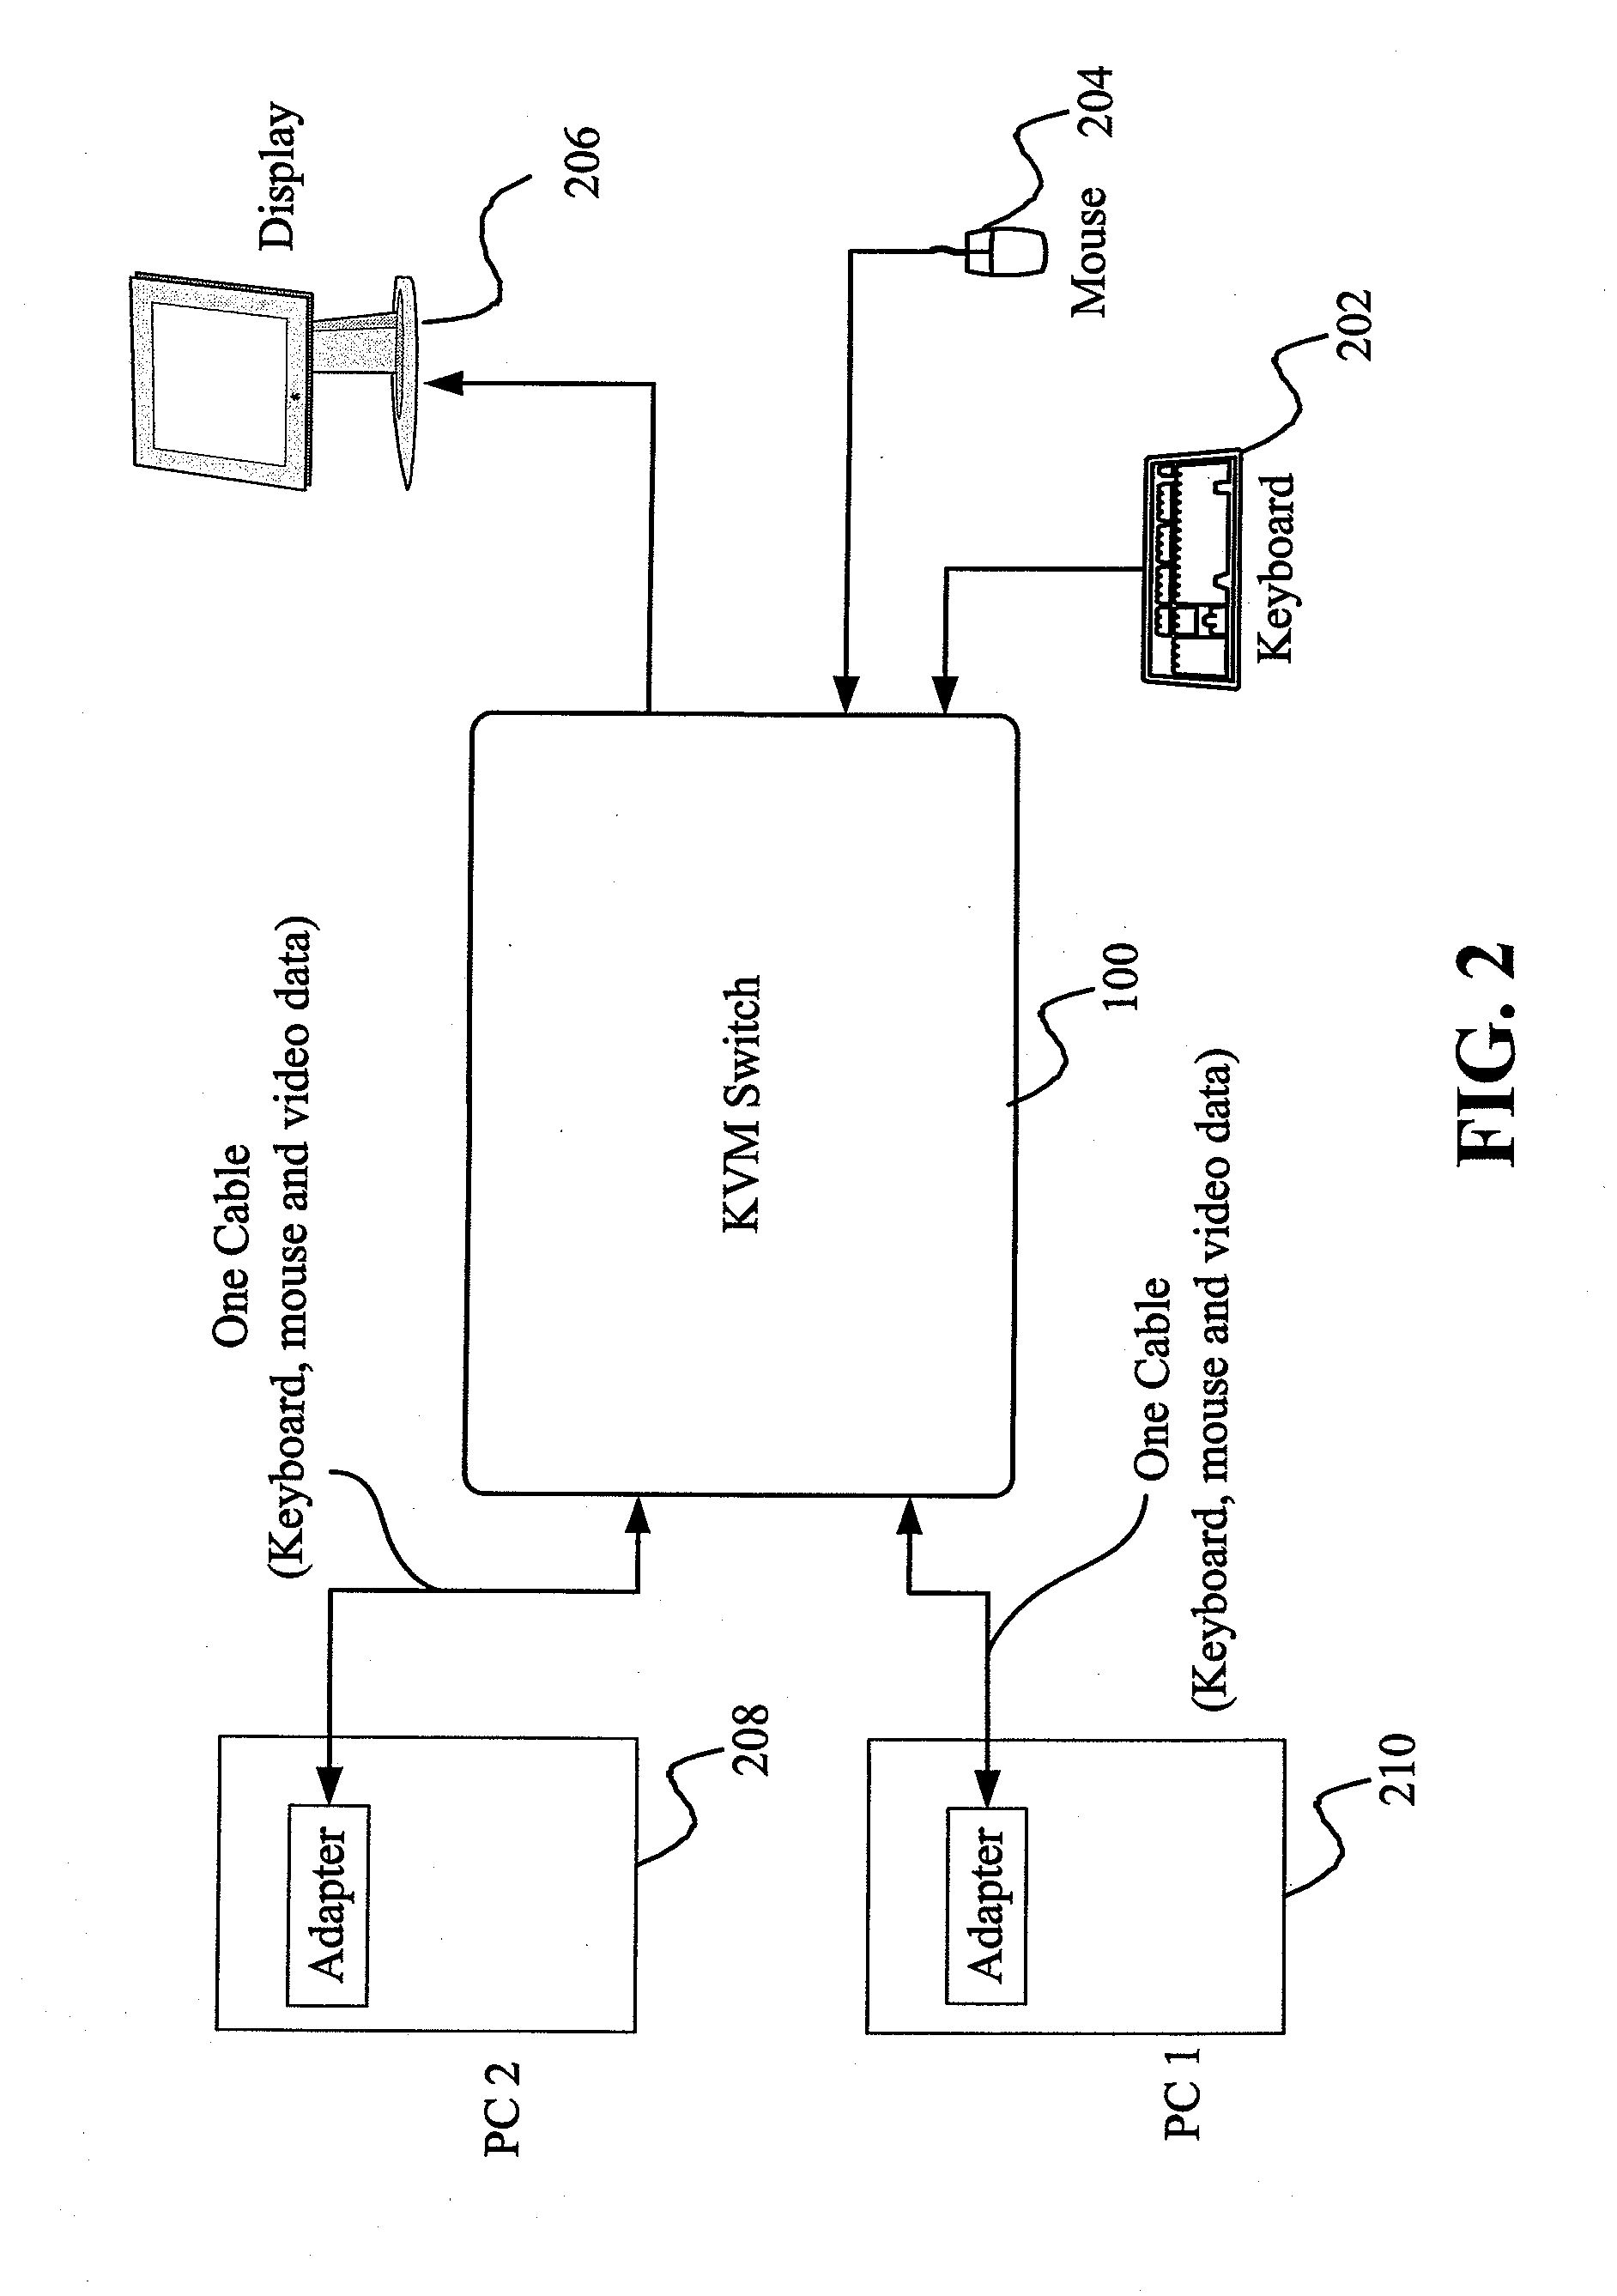 KVM switch system capable of transmitting keyboard-mouse data and receiving video data through single cable